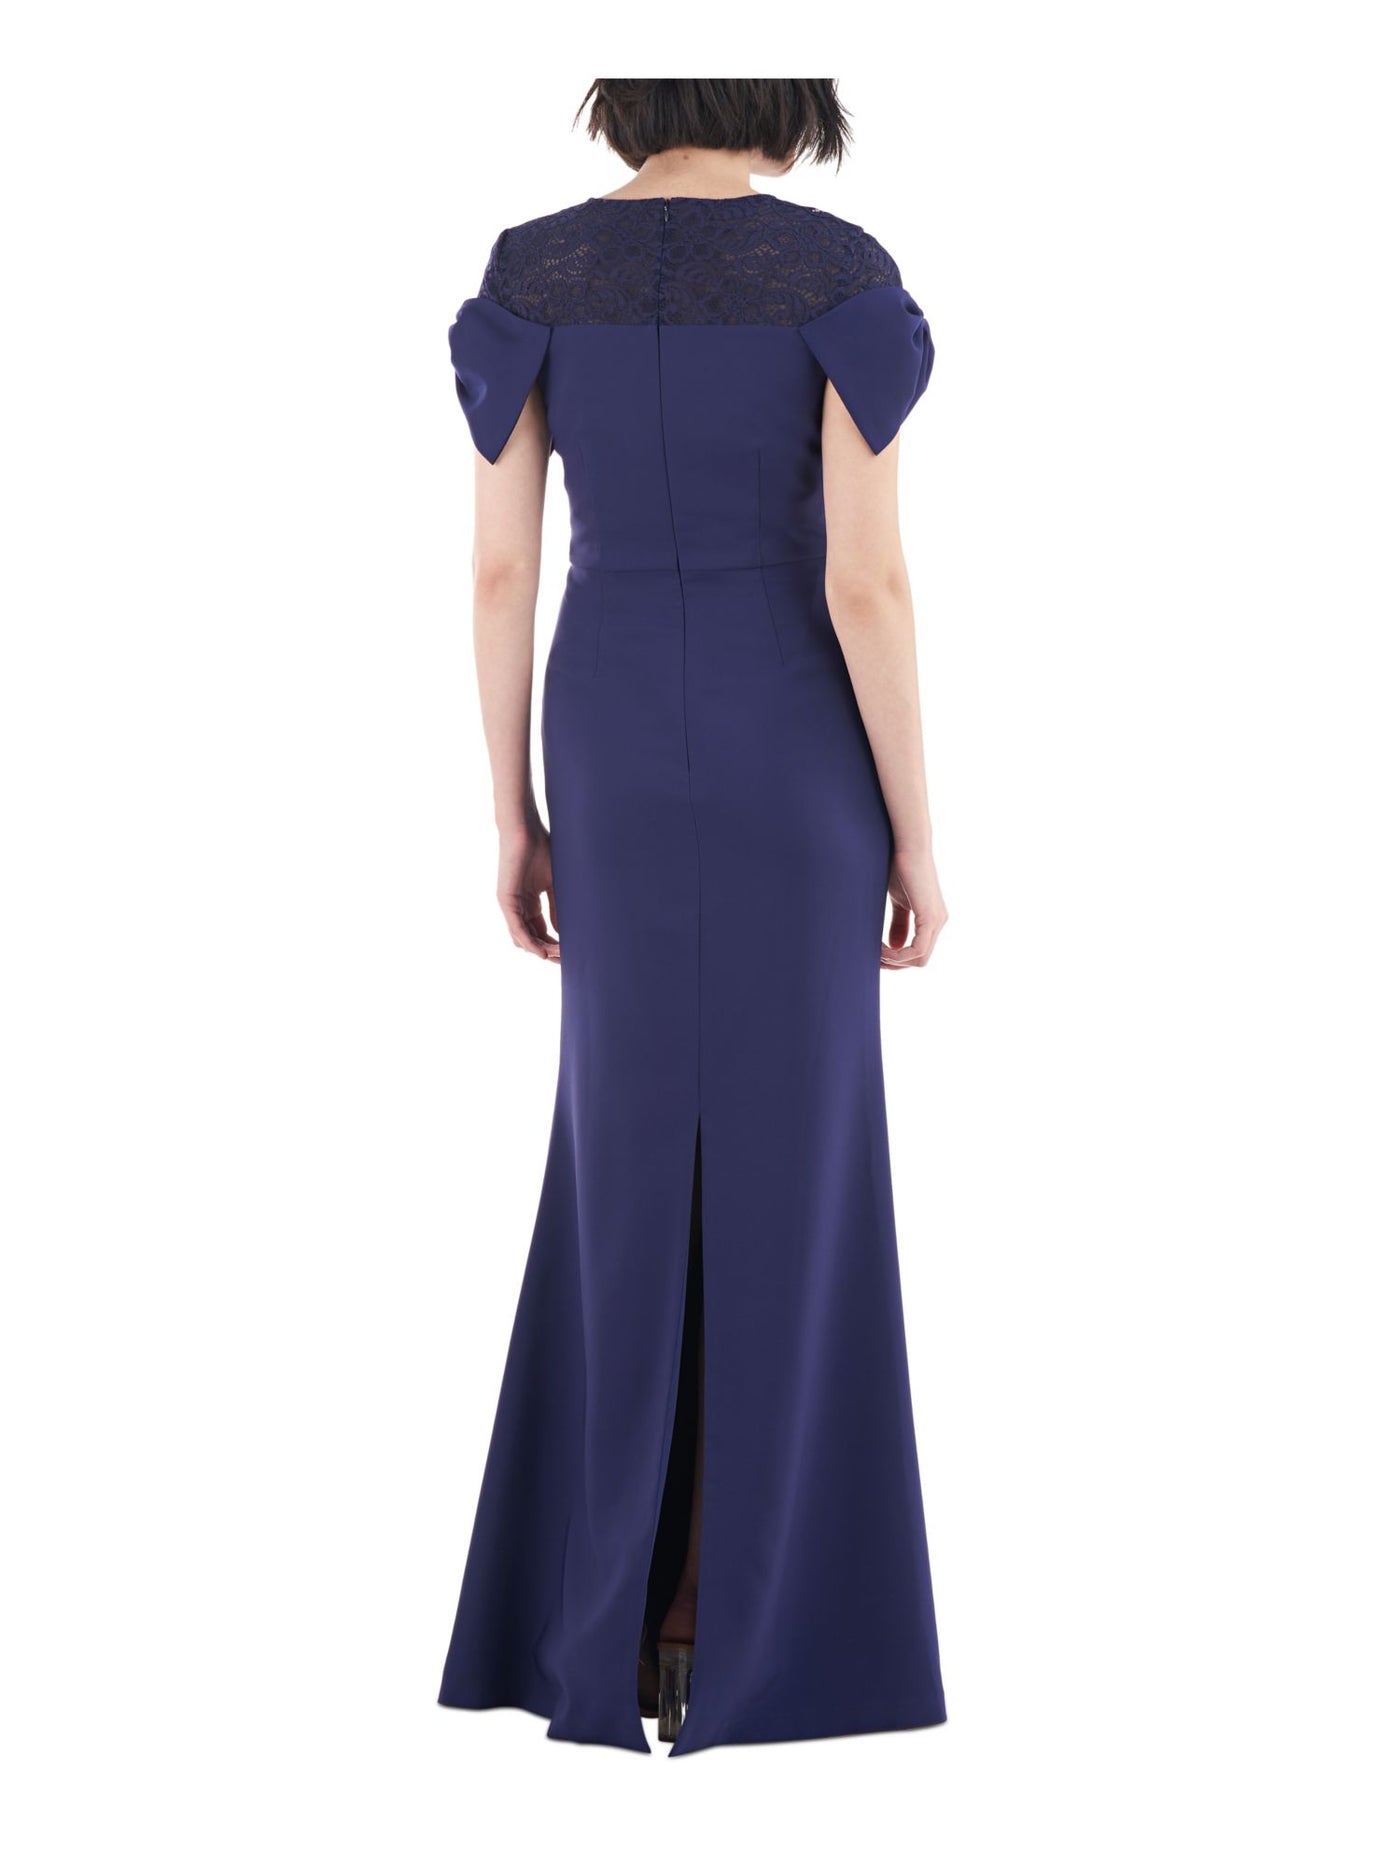 JS COLLECTION Womens Navy Zippered Slitted Bow Detail Cap Sleeves Crew Neck Full-Length Formal Gown Dress 2